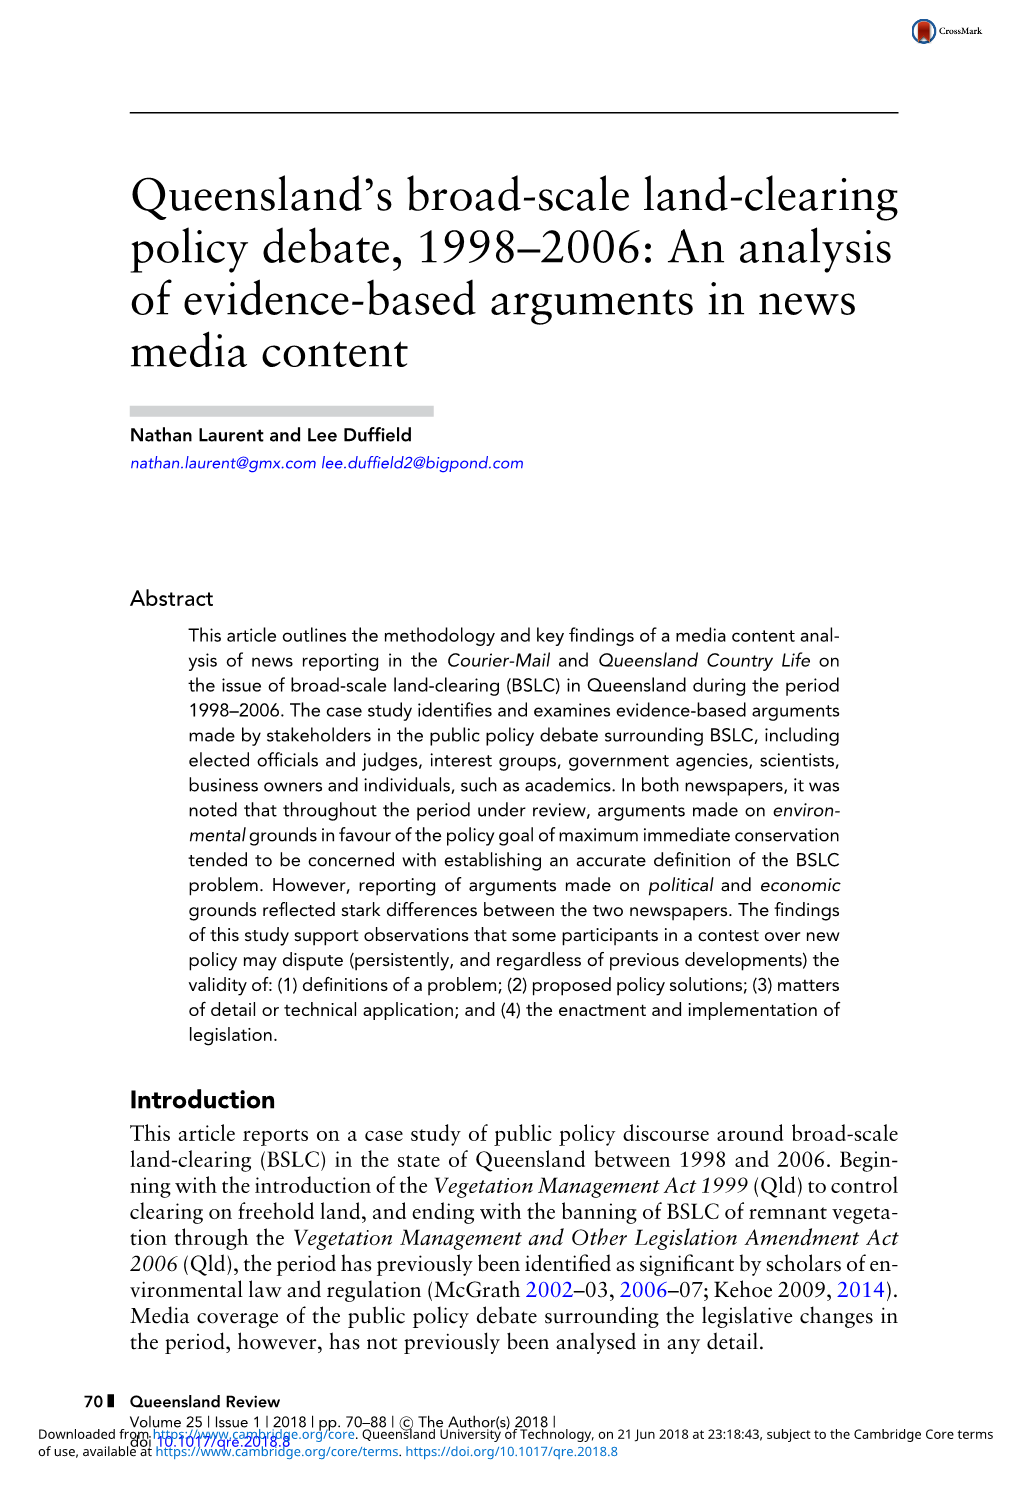 Queensland's Broad-Scale Land-Clearing Policy Debate, 1998–2006: an Analysis of Evidence-Based Arguments in News Media Conte